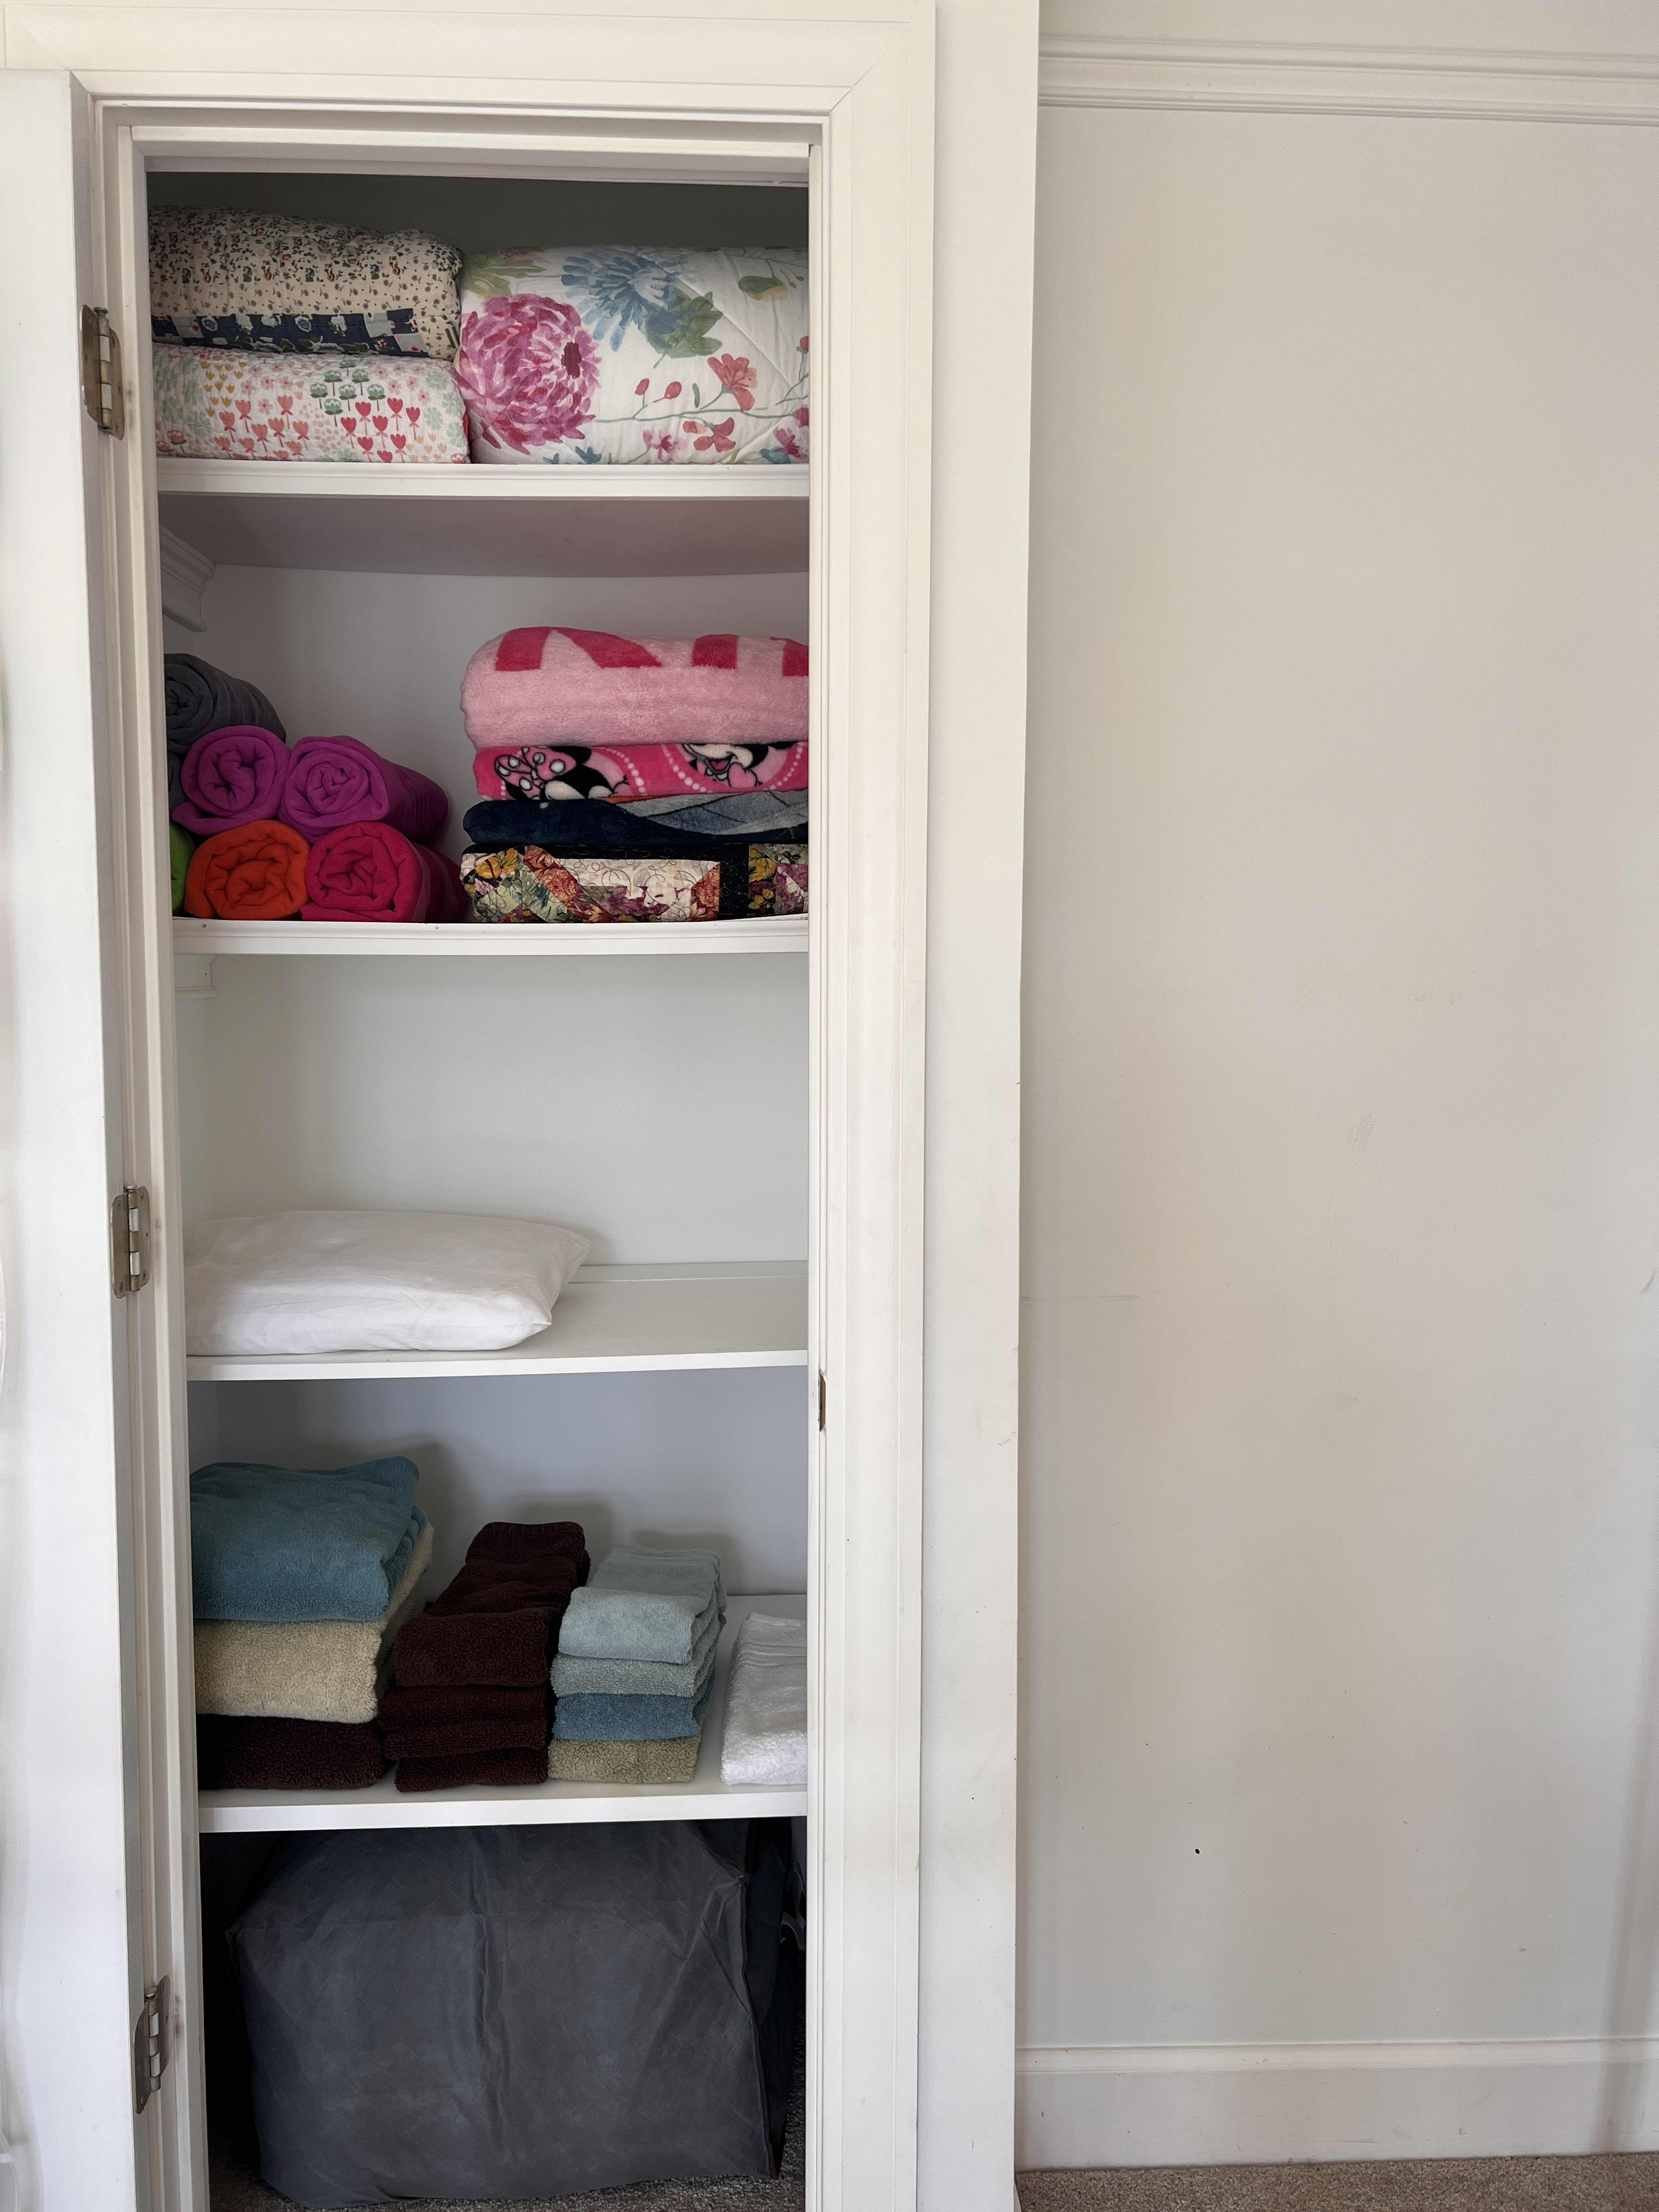 Linen Closet Ideas and Tips to Improve an Overlooked Storage Space